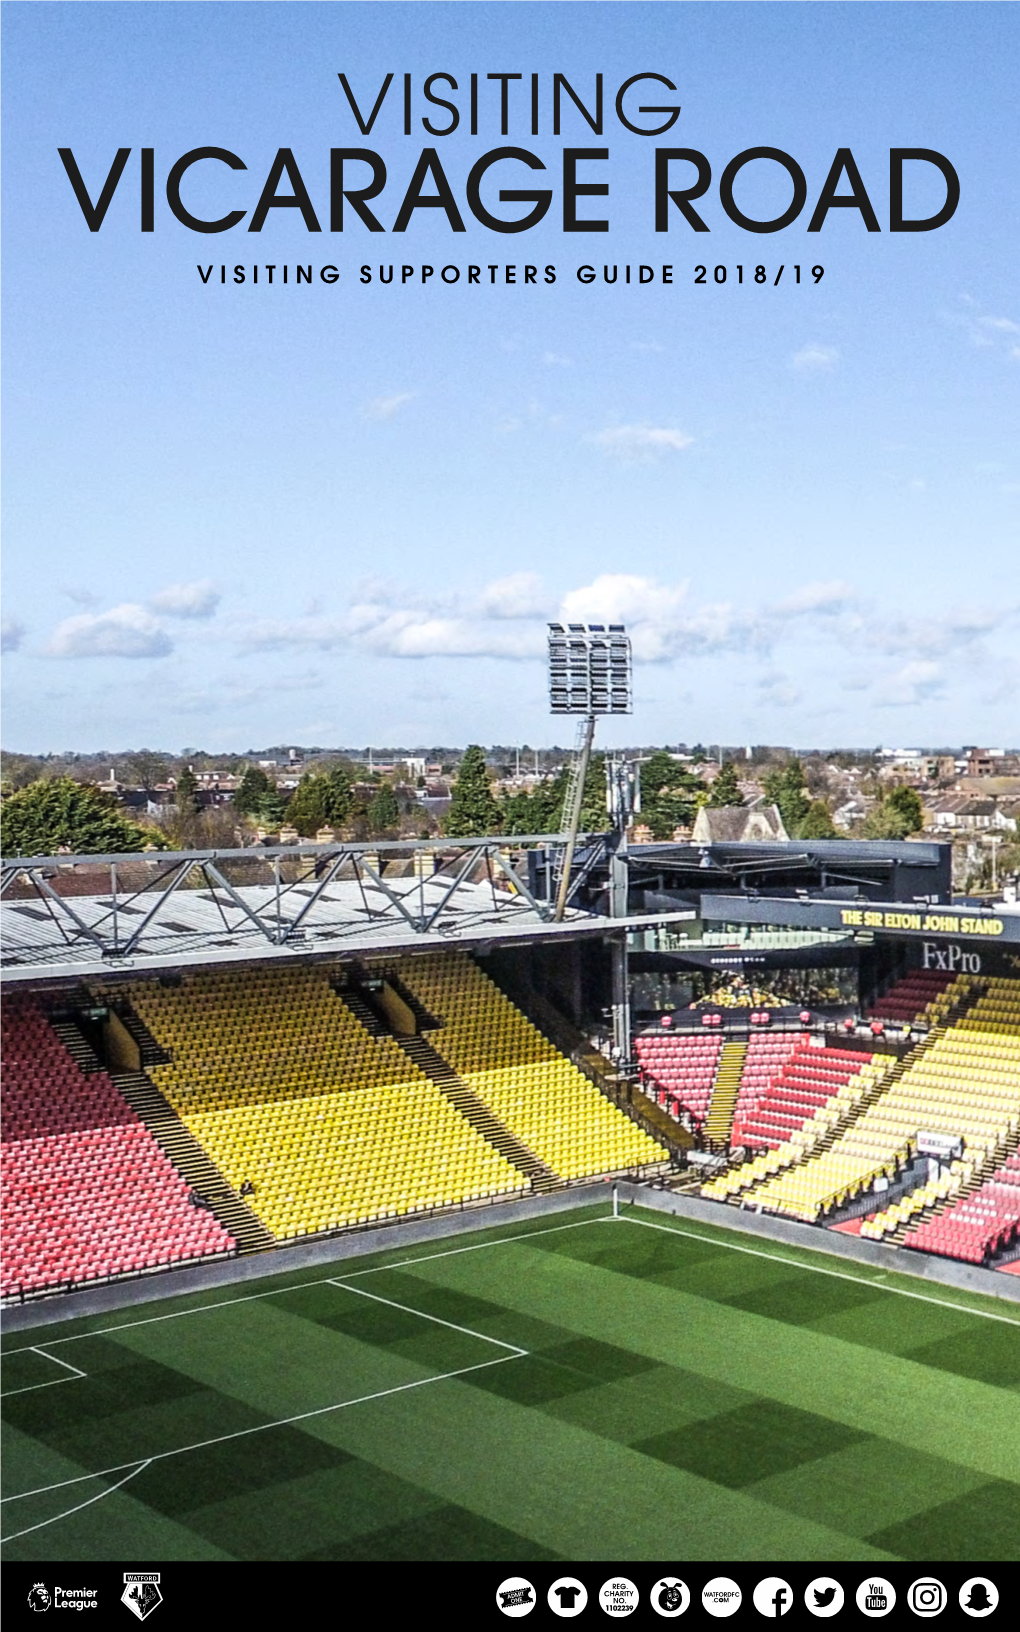 Vicarage Road Visiting Supporters Plan